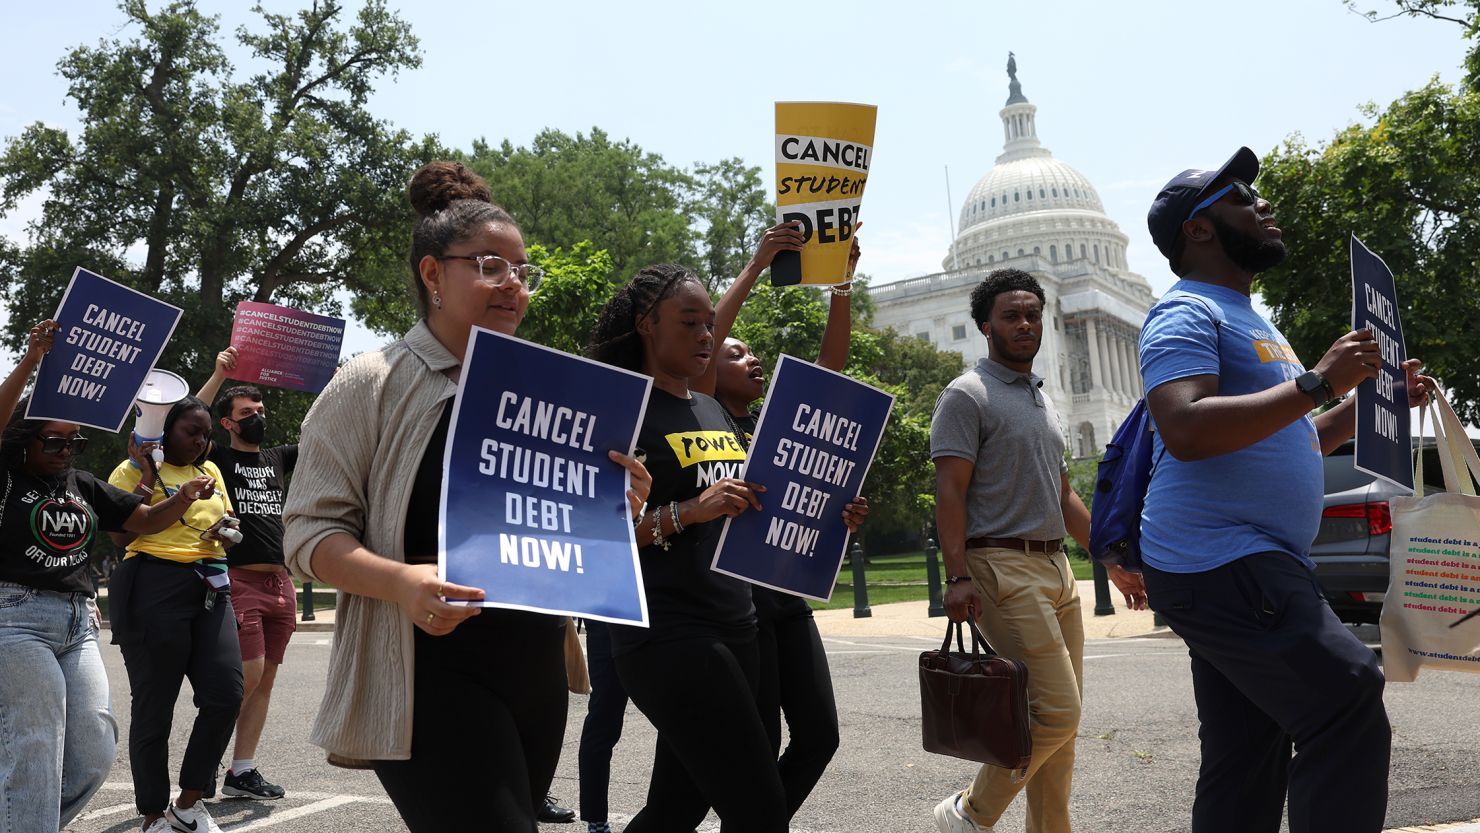 Student debt relief activists participate in a rally as they march from the US Supreme Court to the White House.